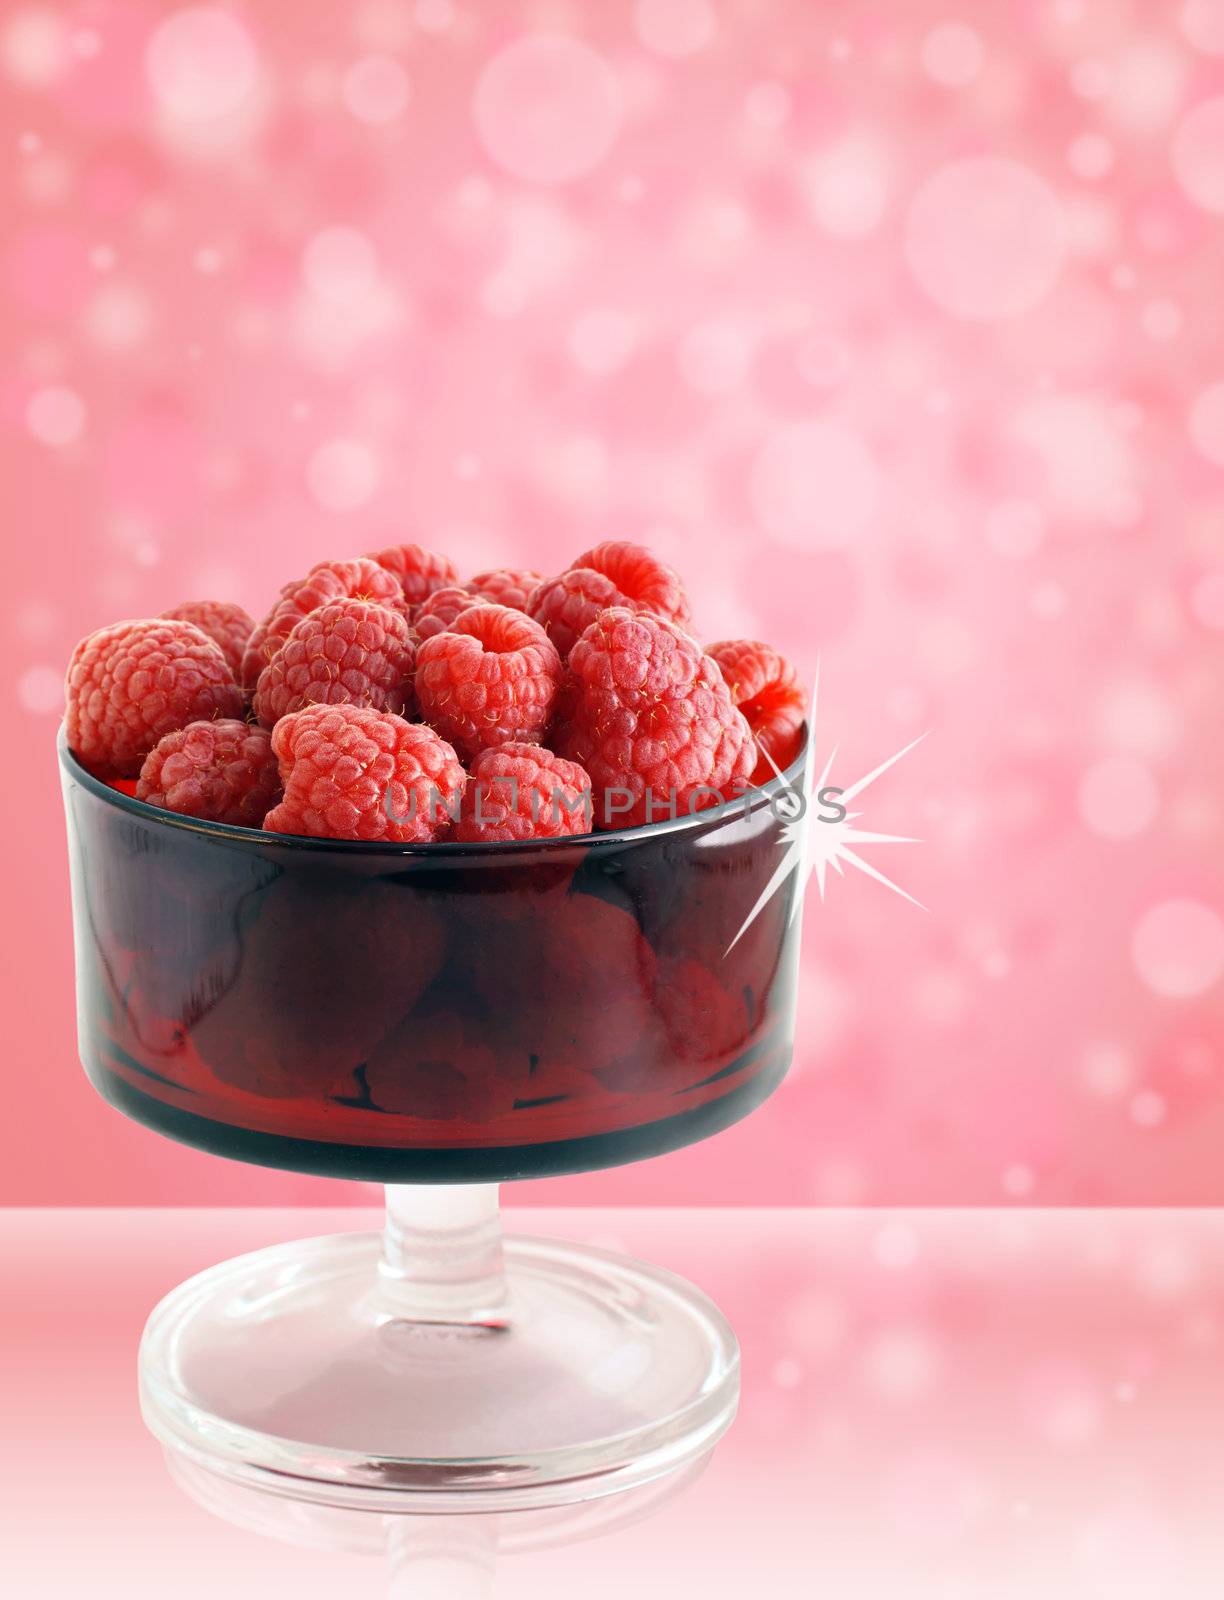 So good they sparkle: sweet,delicious and healthy raspberries in a vintage red colored glass bowl on fun pink background